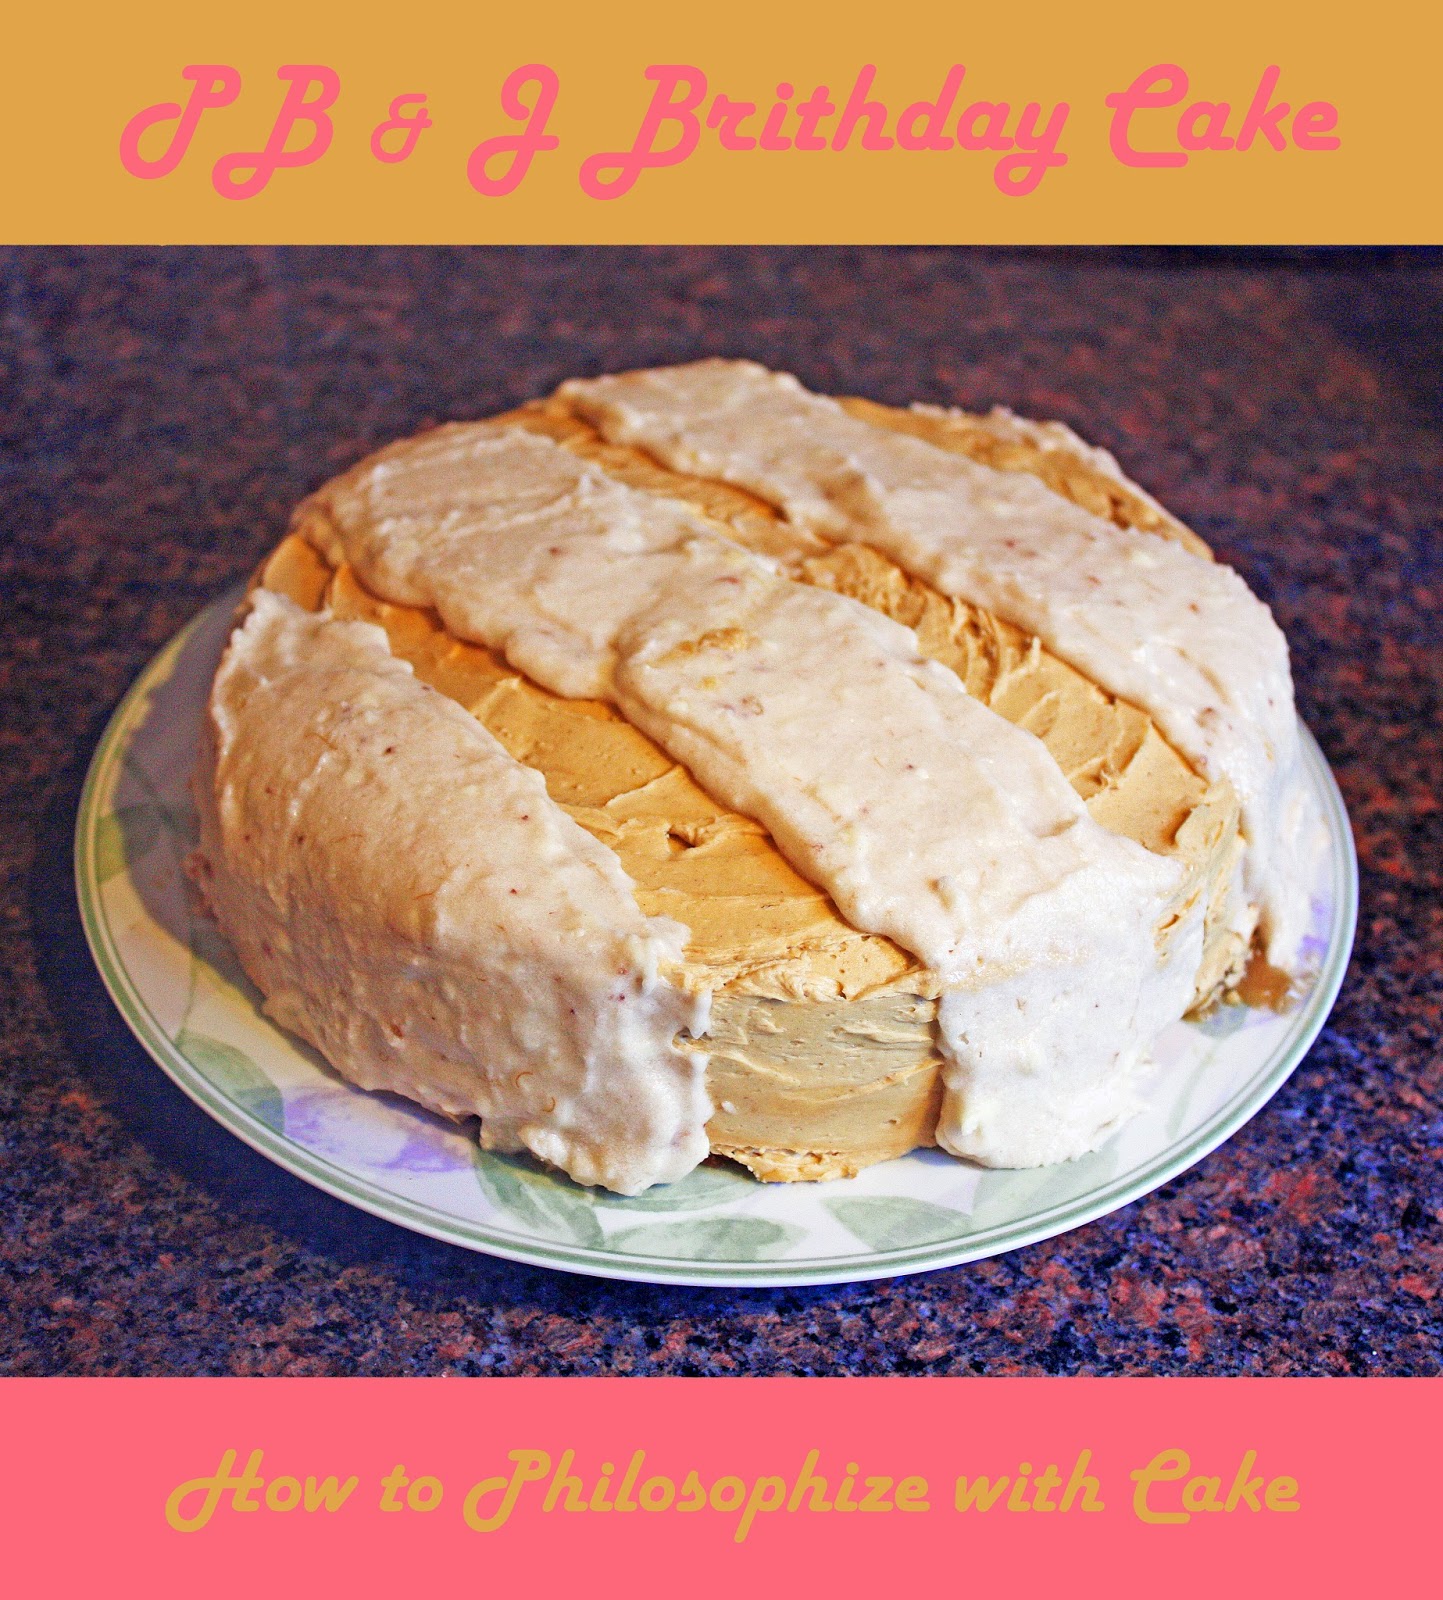 peanut butter and jelly birthday cake how to philosophize with cake